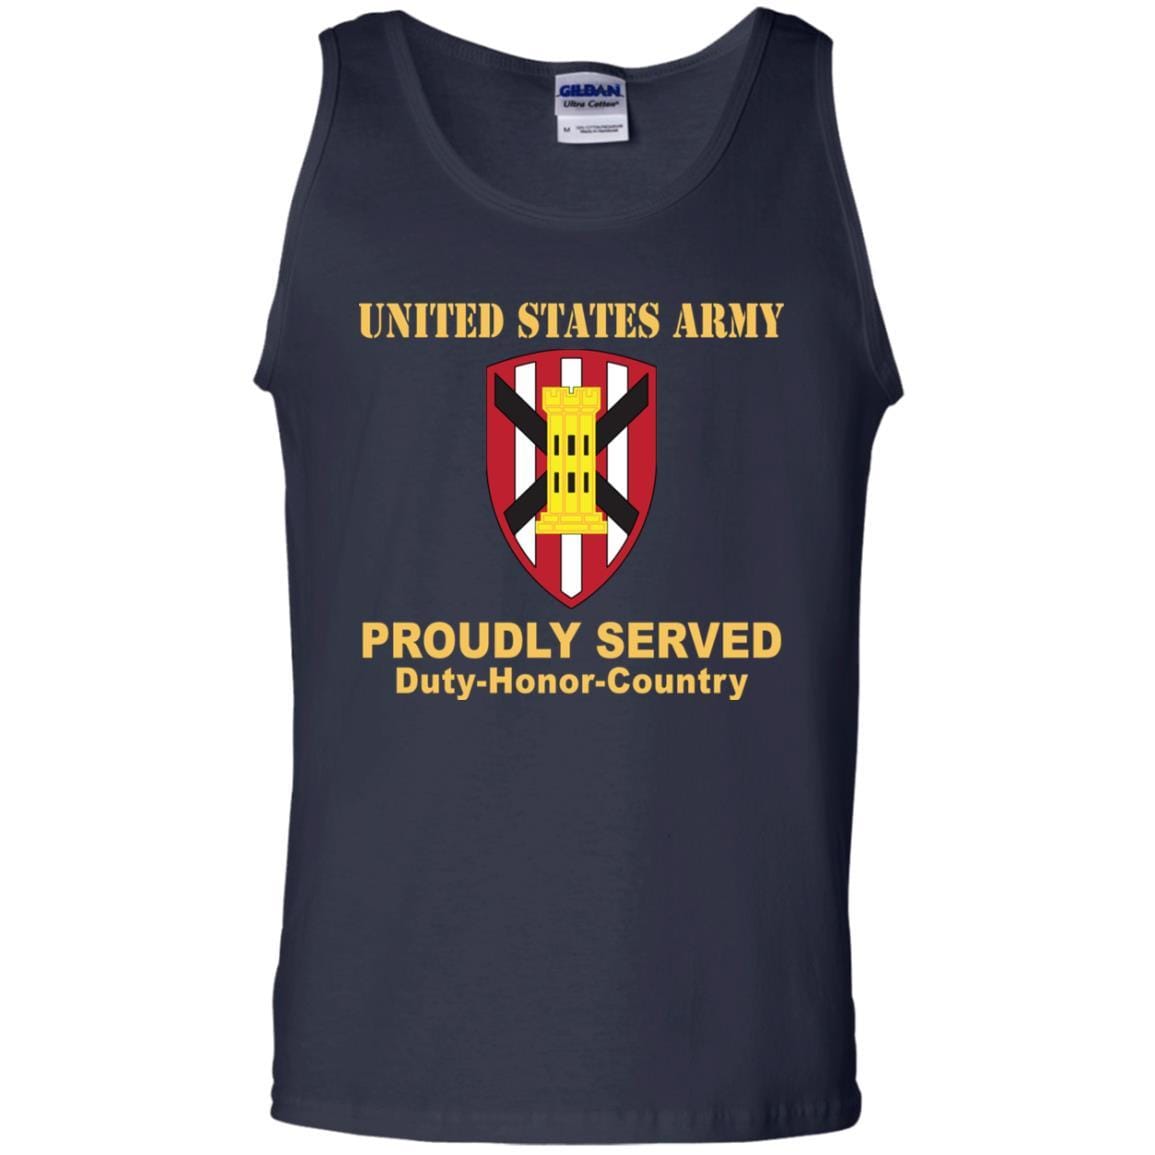 US ARMY 7TH ENGINEER BRIGADE- Proudly Served T-Shirt On Front For Men-TShirt-Army-Veterans Nation